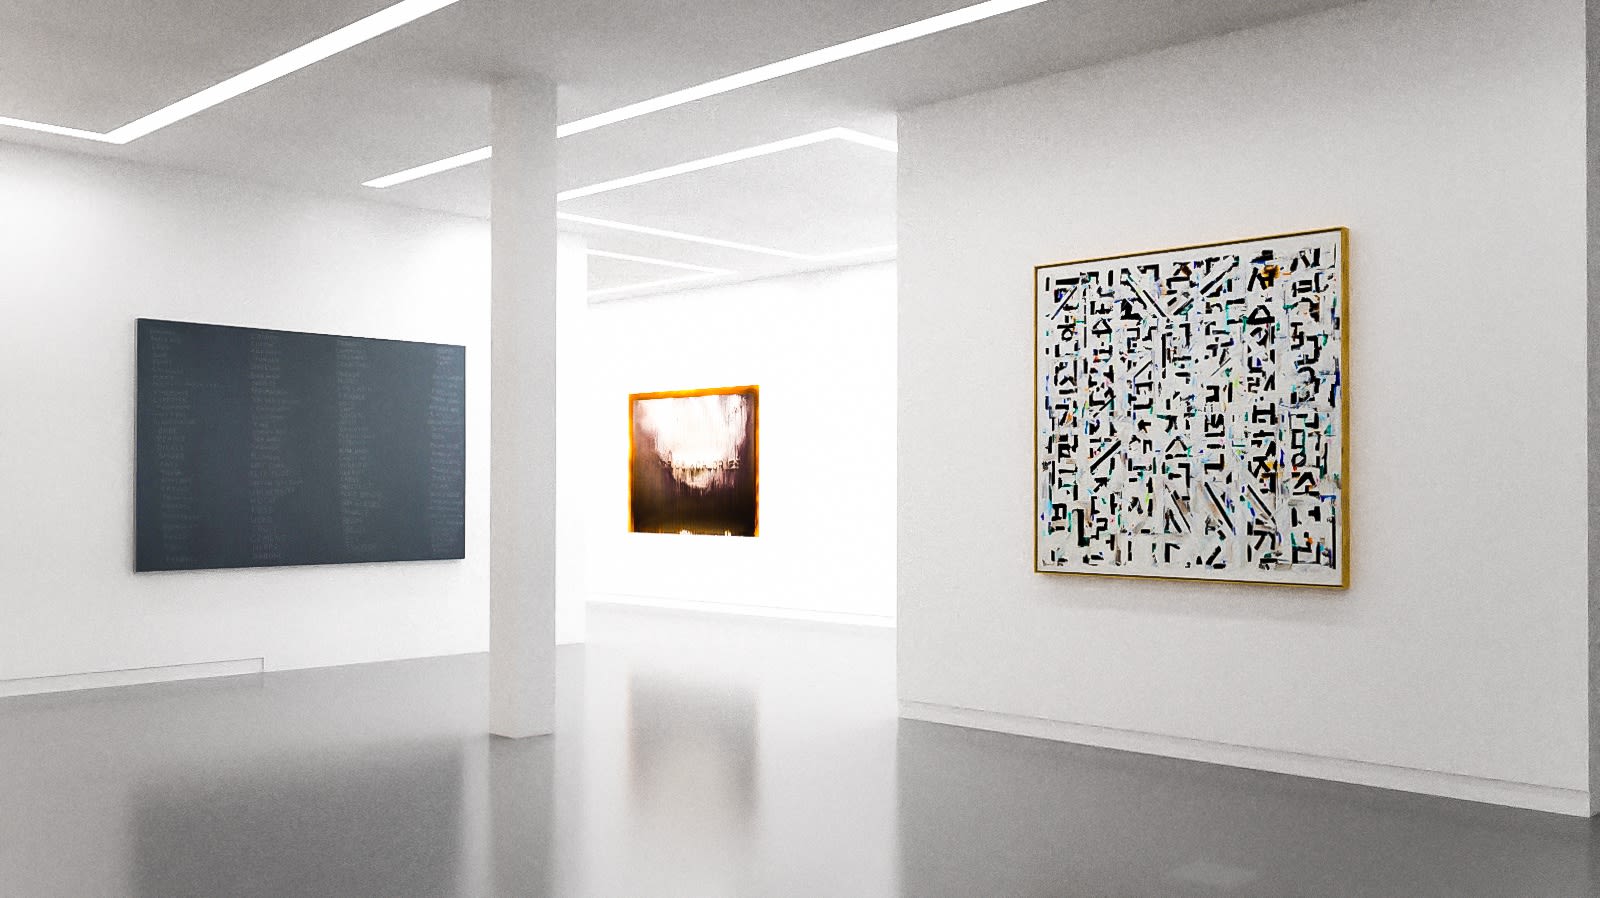 Works by Scott Reeder, Michael Joo, and Young-Il Ahn in The Written Word (virtual exhibition view), 2020, Kavi Gupta